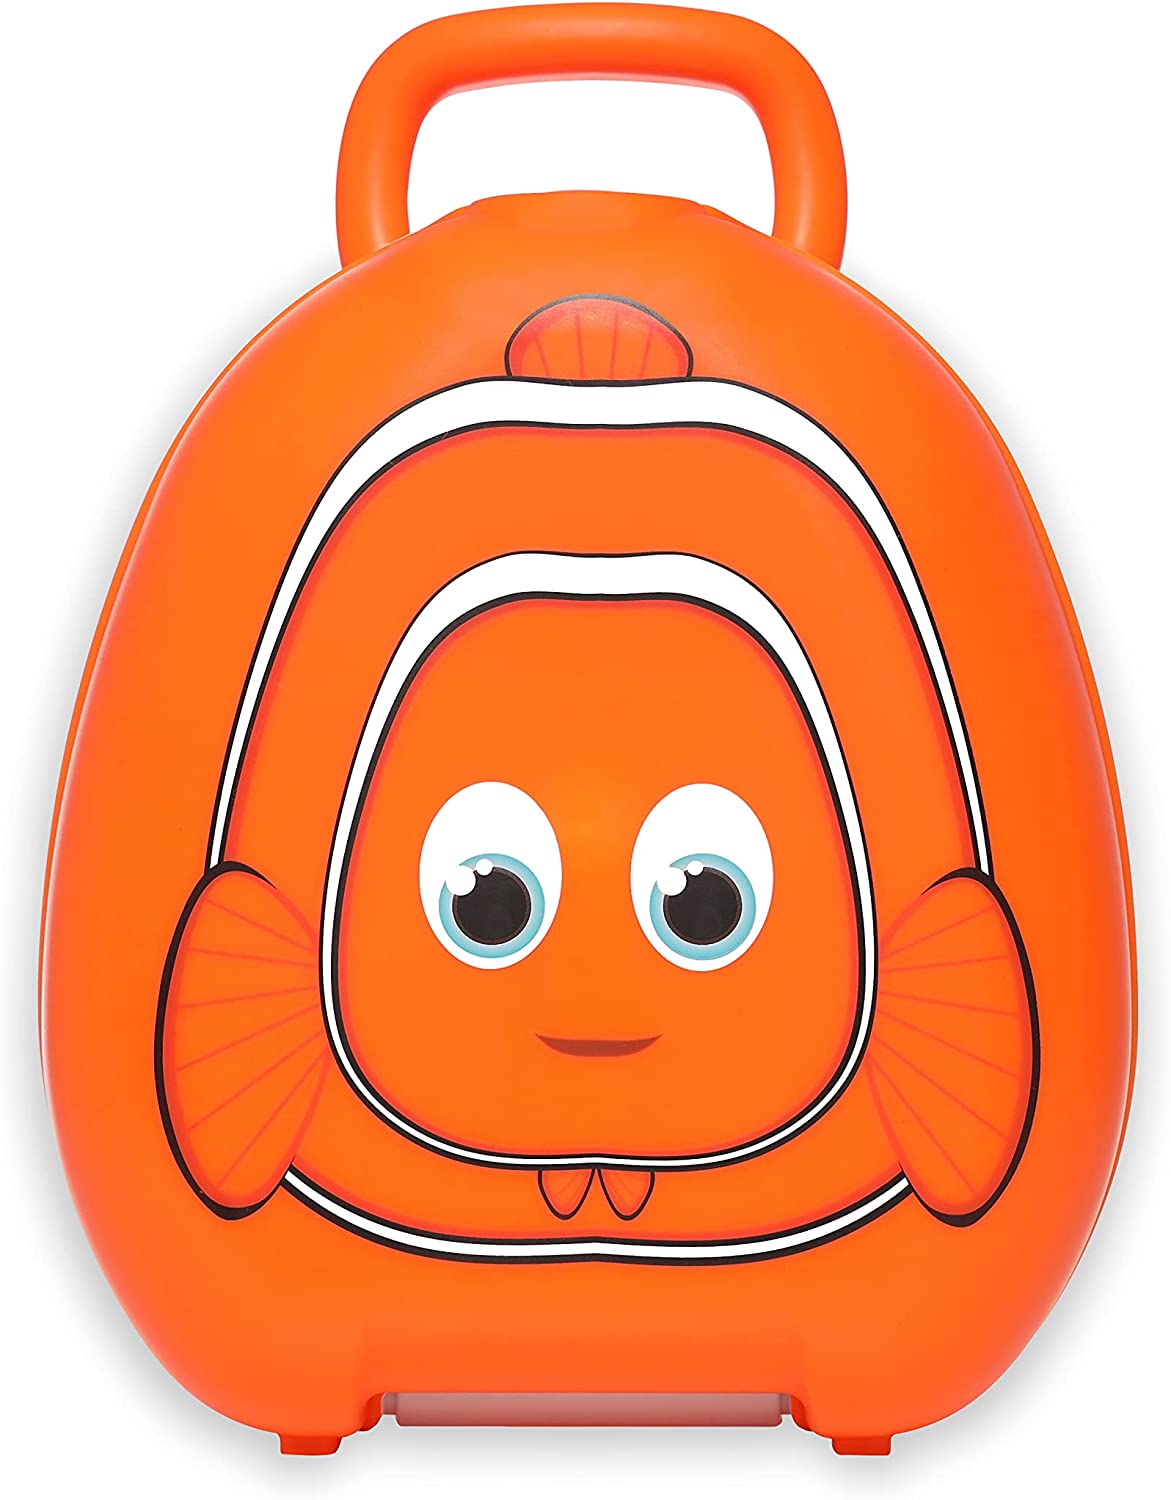 My Carry Potty - Clownfish Travel Potty, Award-Winning Portable Toddler Toilet Seat for Kids to Take Everywhere